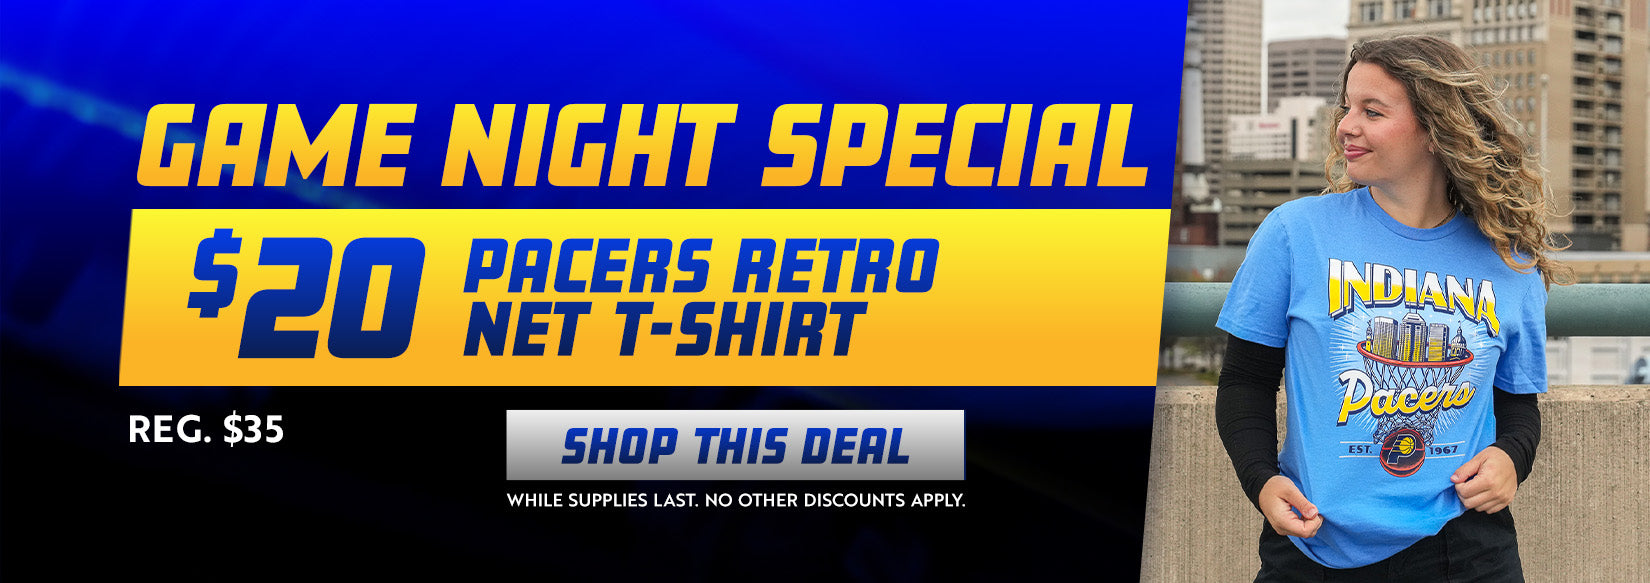 Game Night Special Pacers Retro Net T-Shirt $20 reg. $35 SHOP THIS DEAL WHILE SUPPLIES LAST. NO OTHER DISCOUNTS APPLY.